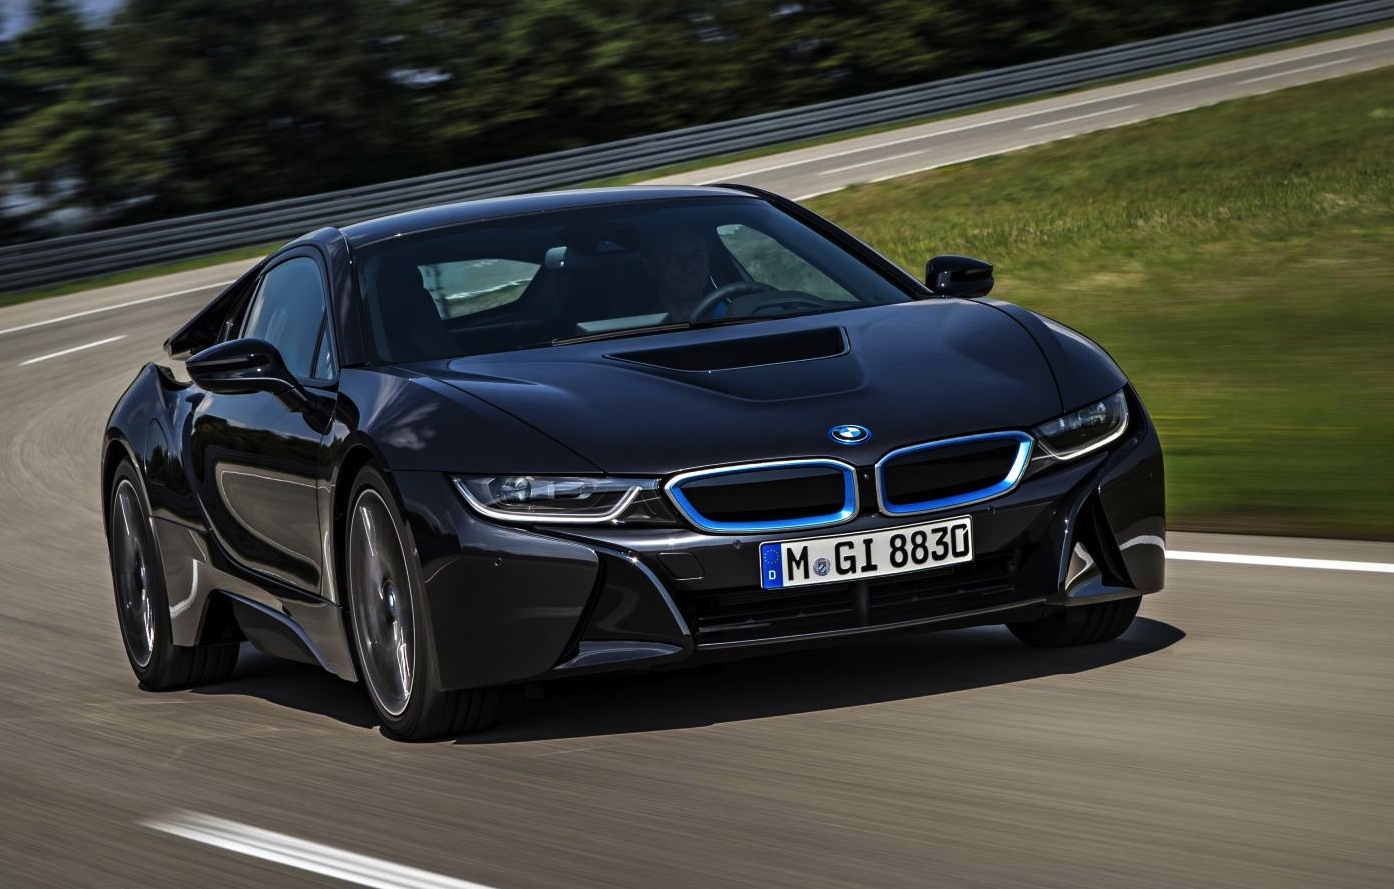 BMW i8 proving too popular for production capacity